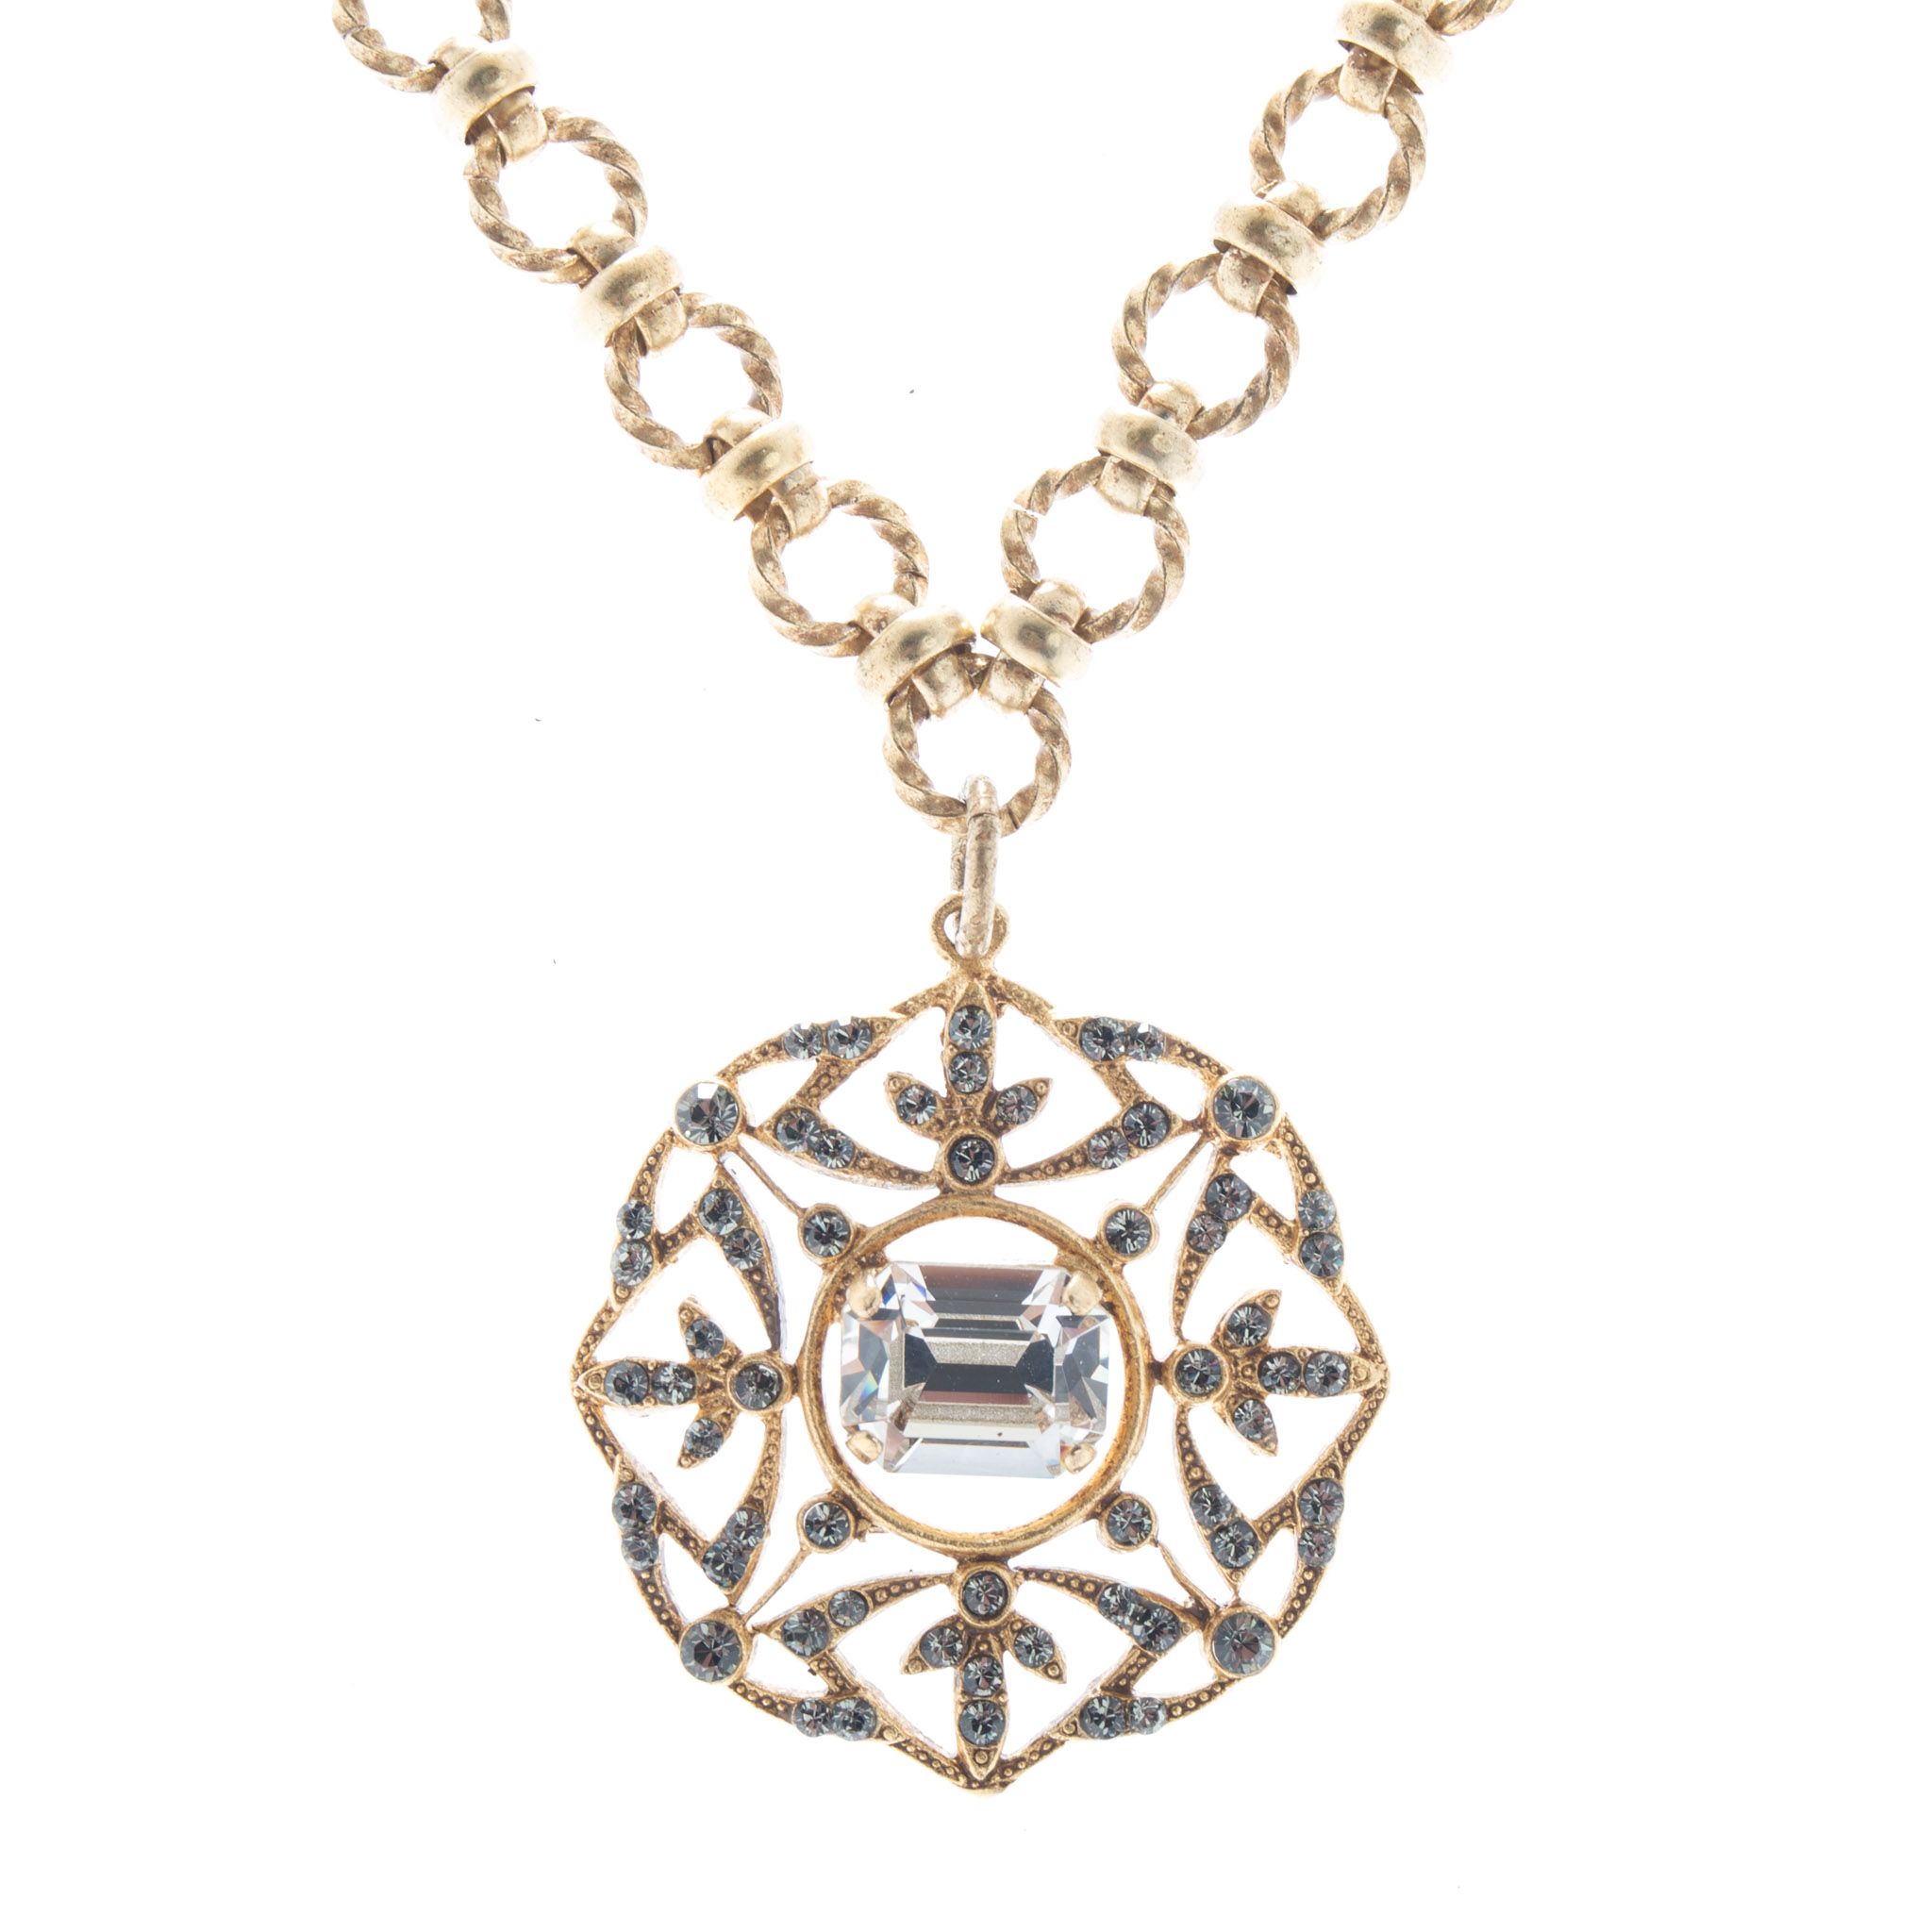 Catherine Popesco Crystal Medallion Pendant Necklace with Fancy Chain